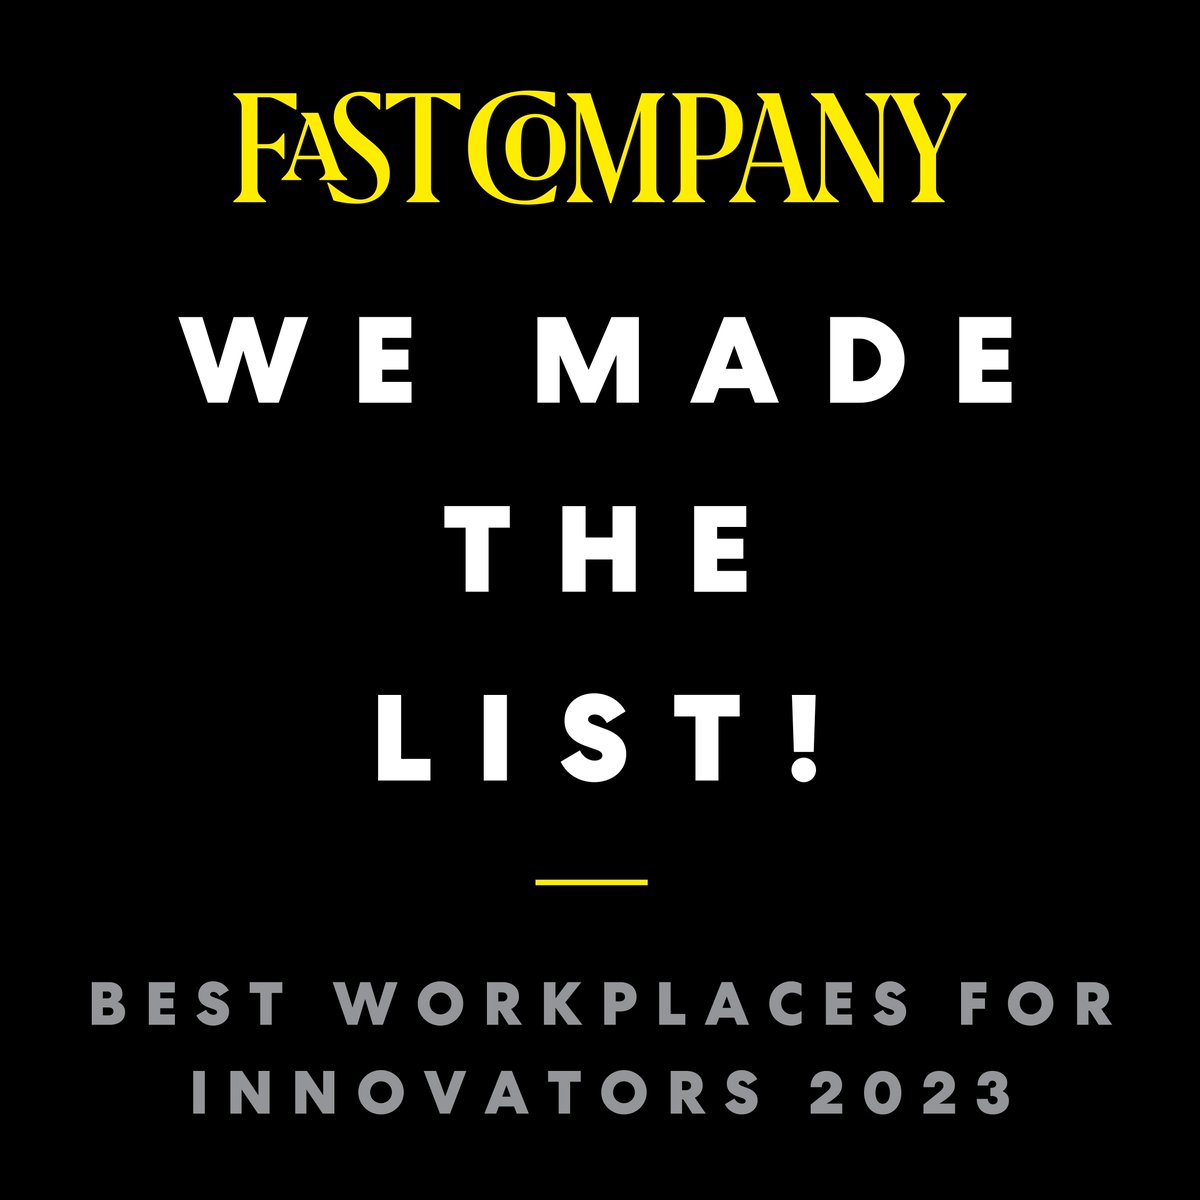 Wow! @AmFam was just named to @FastCompany's Best Workplaces for Innovators list. Learn more about this honor and our commitment to creative thinking, expertise and diverse experience that improves customer value. bit.ly/44dzh82 | #FCBestWorkplaces #iWork4AmFam